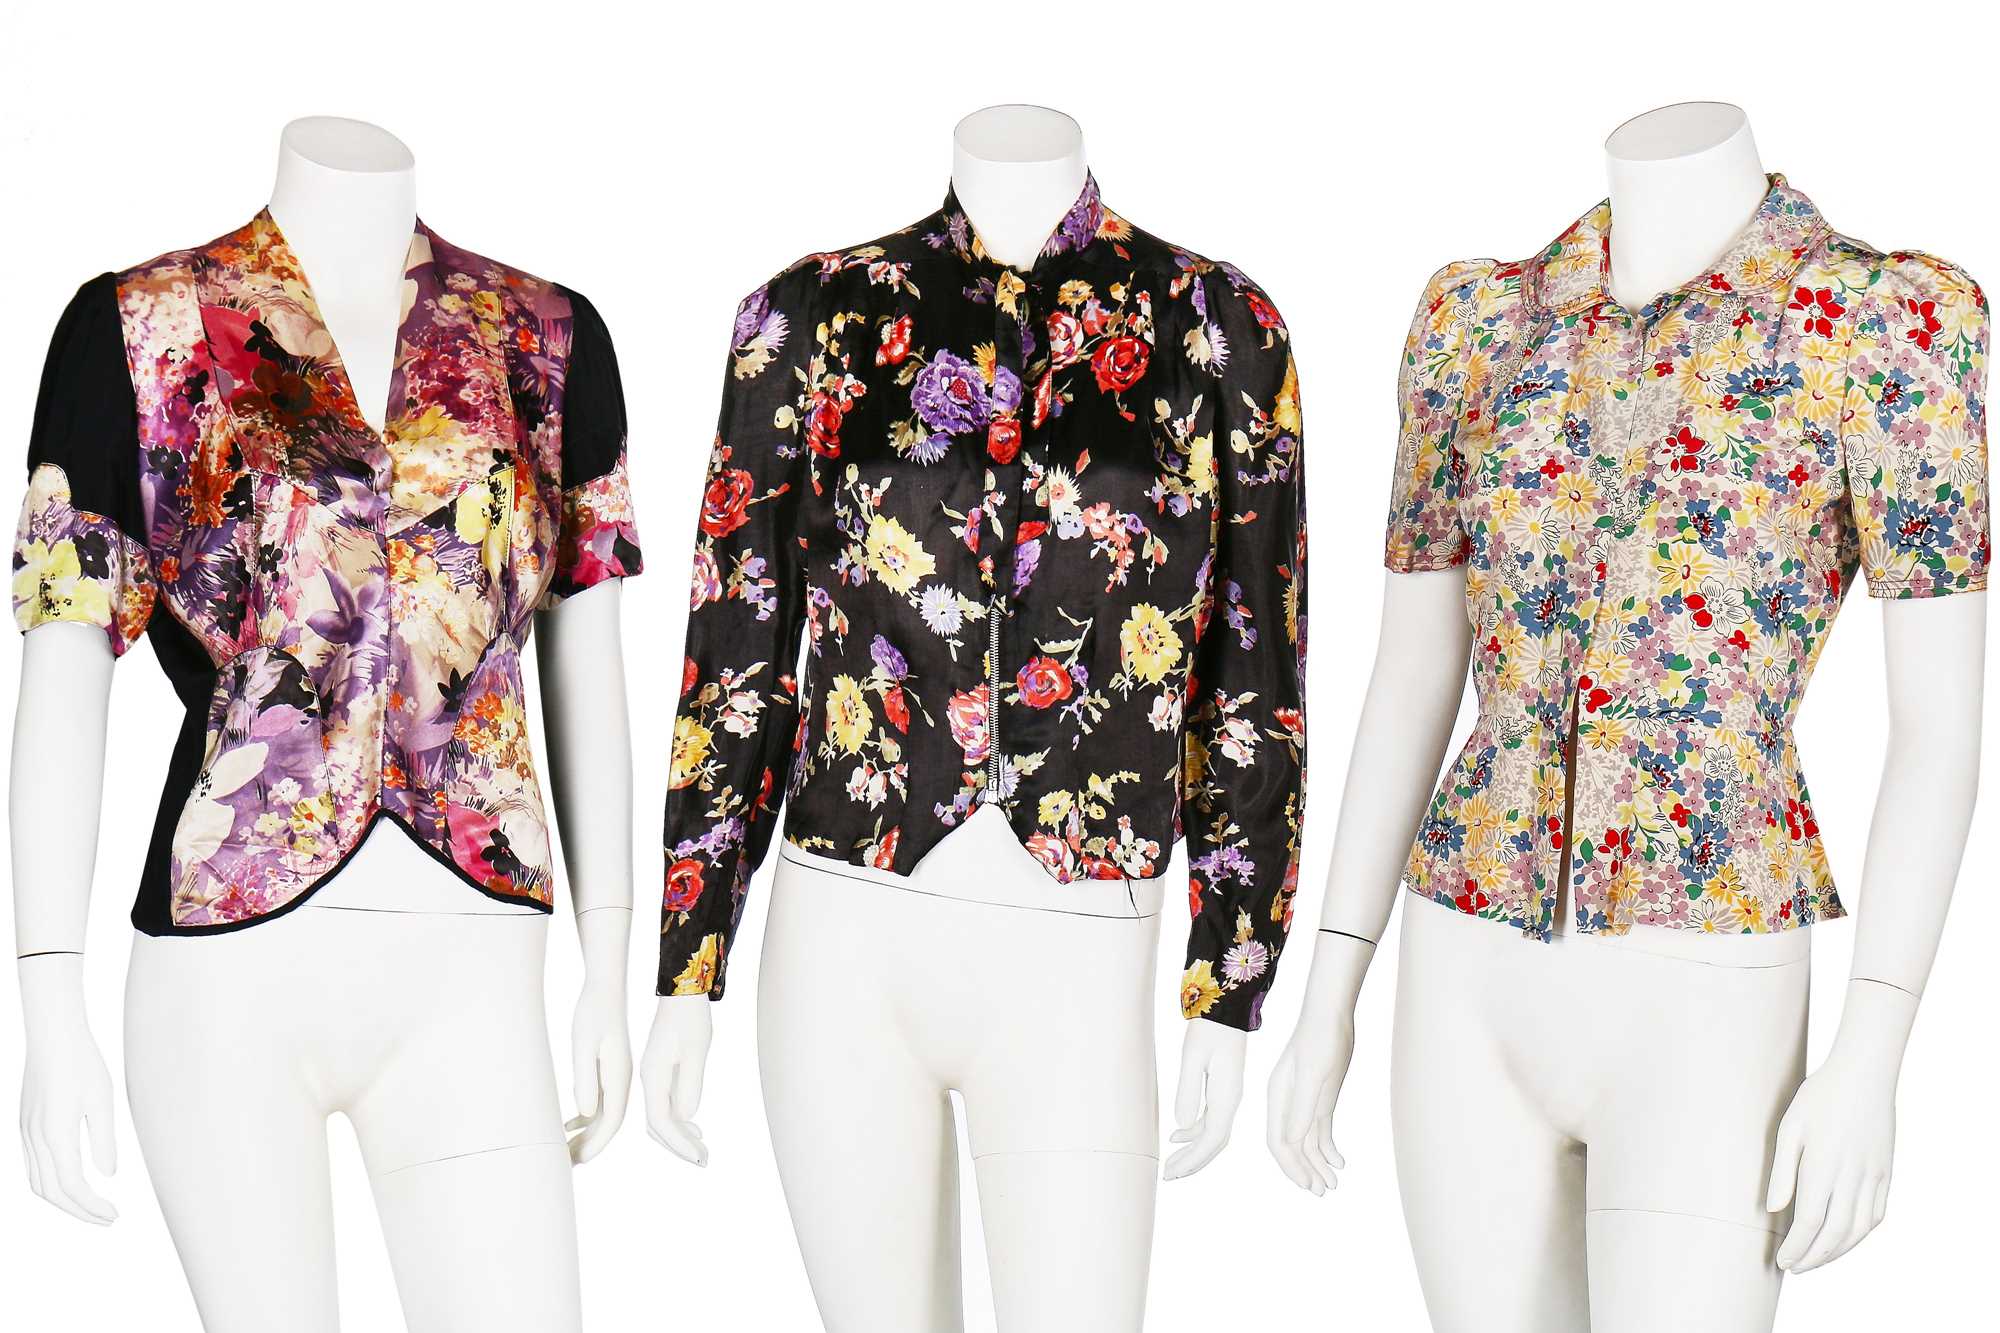 Lot 73 - A large group of interesting blouses and bodices, mainly 1940s